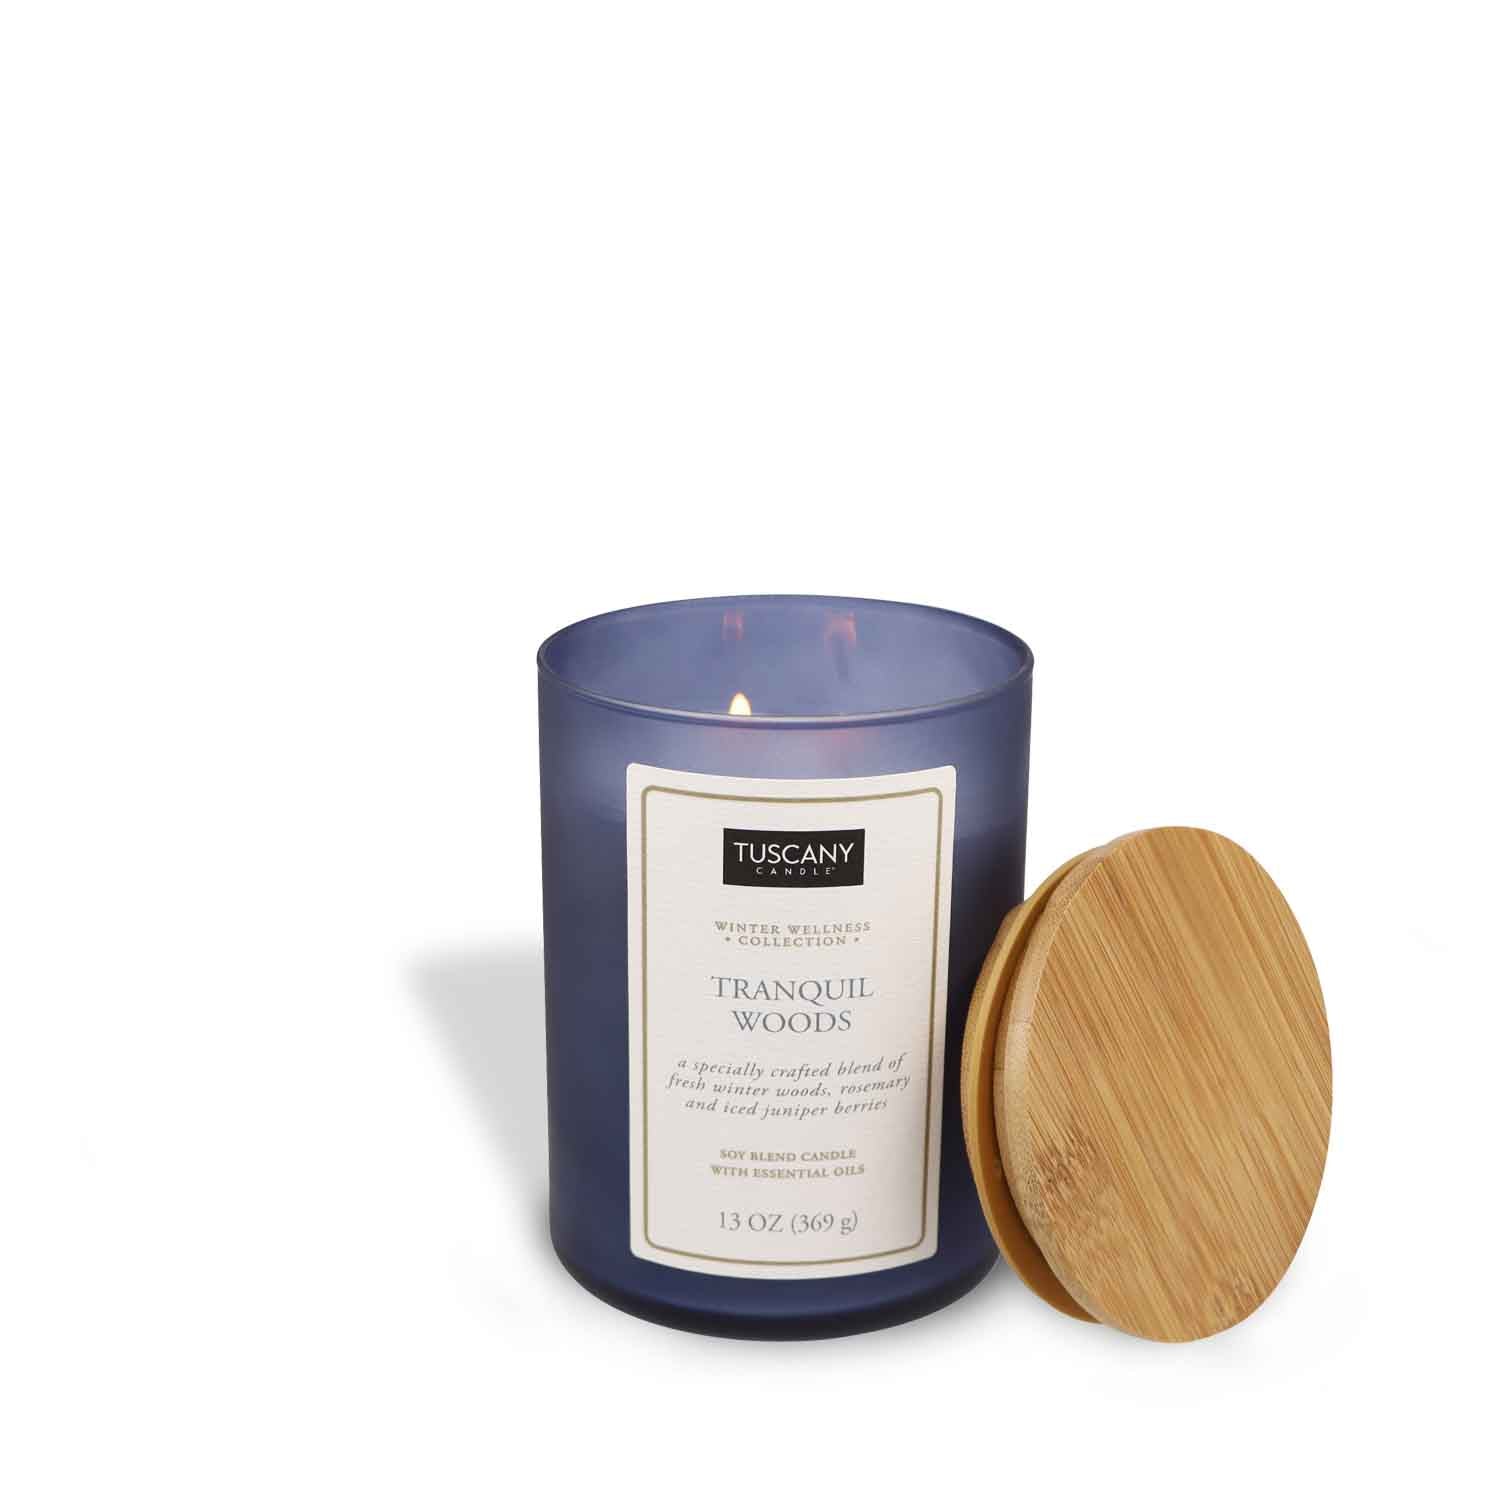 A Tranquil Woods Scented Jar Candle (13 oz) – Winter Wellness Collection by Tuscany Candle with a wooden lid next to it.